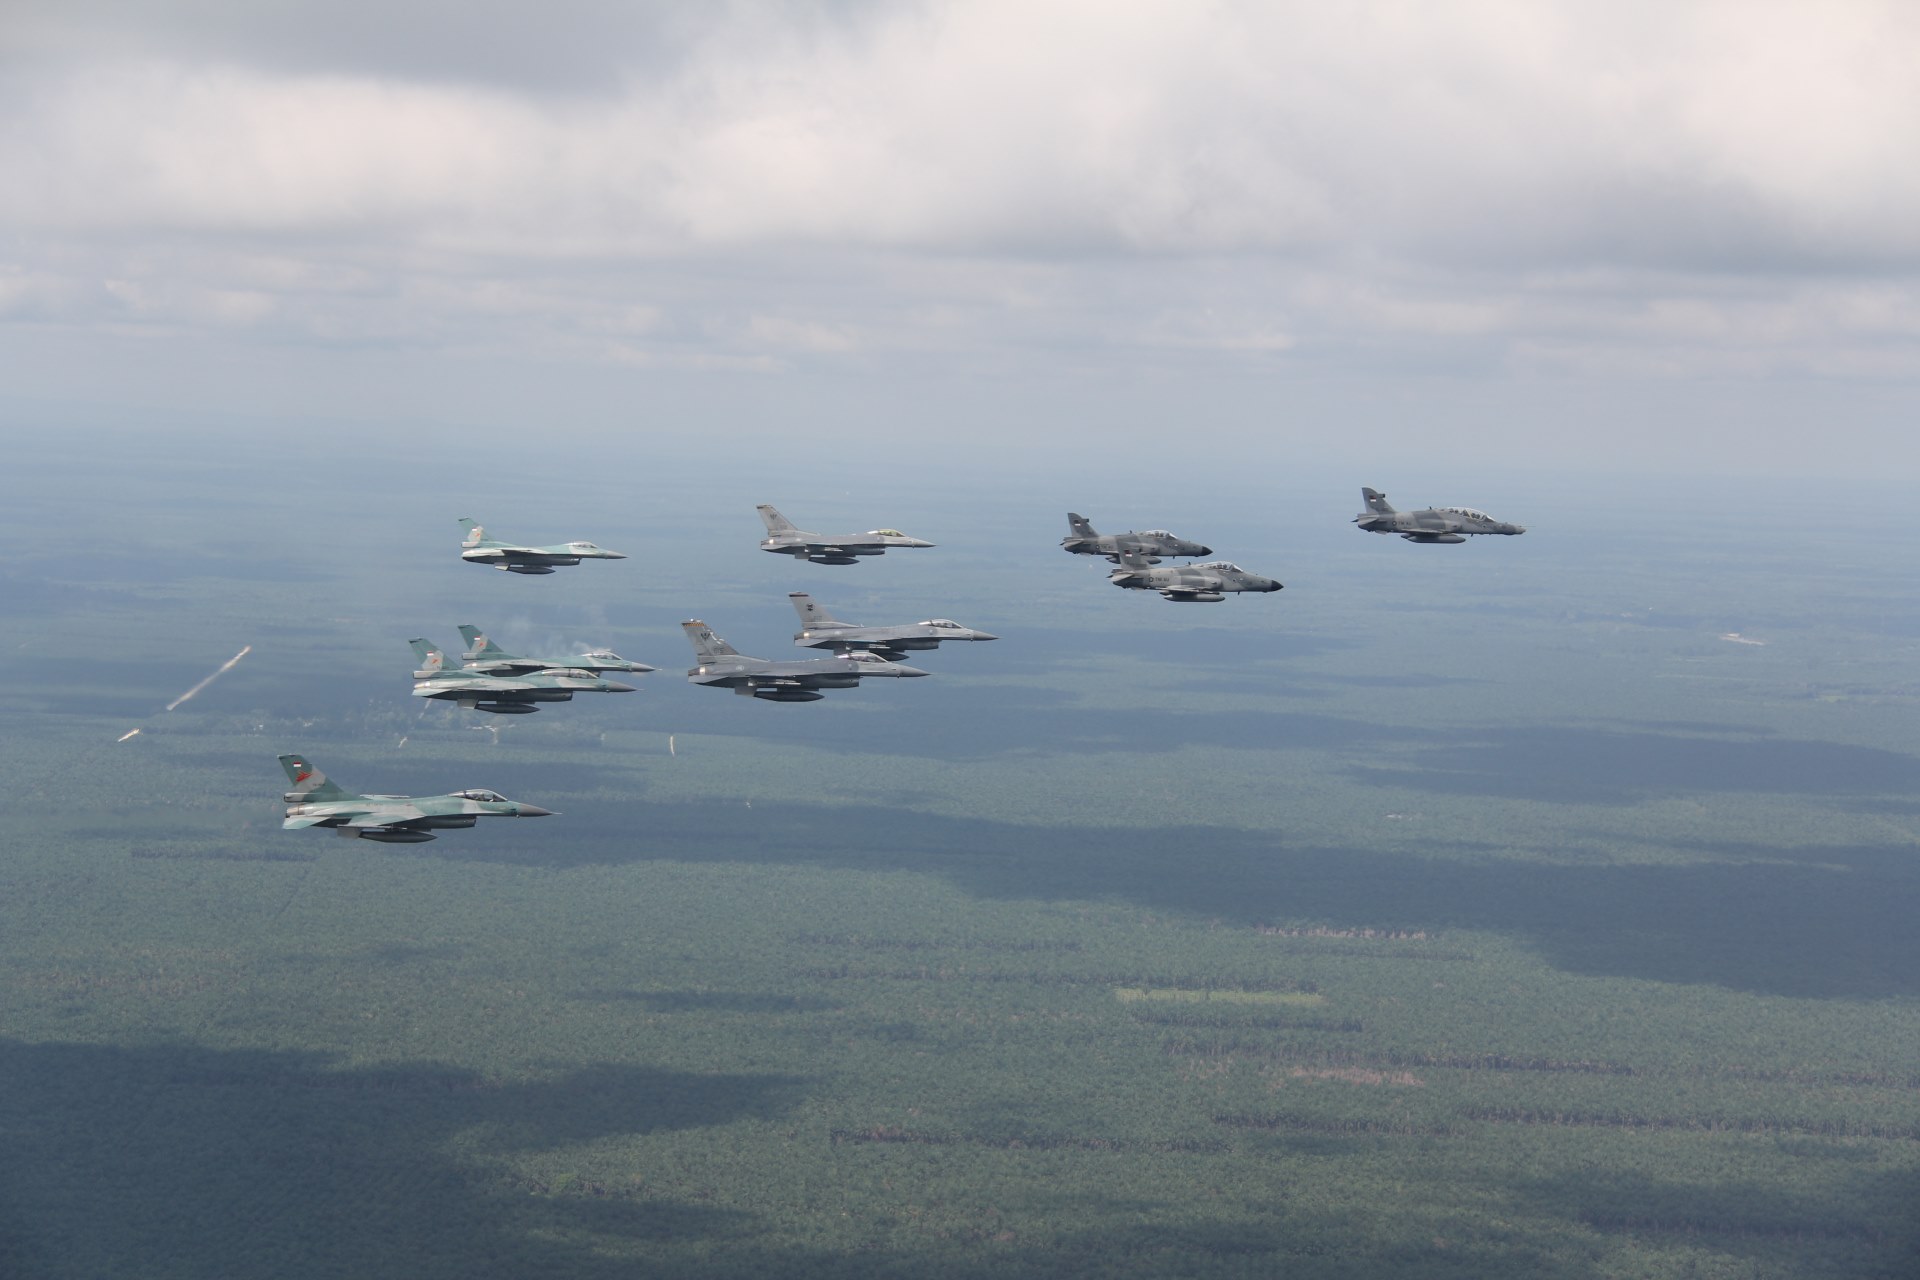 The Republic of Singapore Air Force (RSAF)'s F-16C and the Indonesian Air Force (TNI AU)'s F-16A/B and Hawk 109/209 flying in formation during Exercise Elang Indopura 2018.